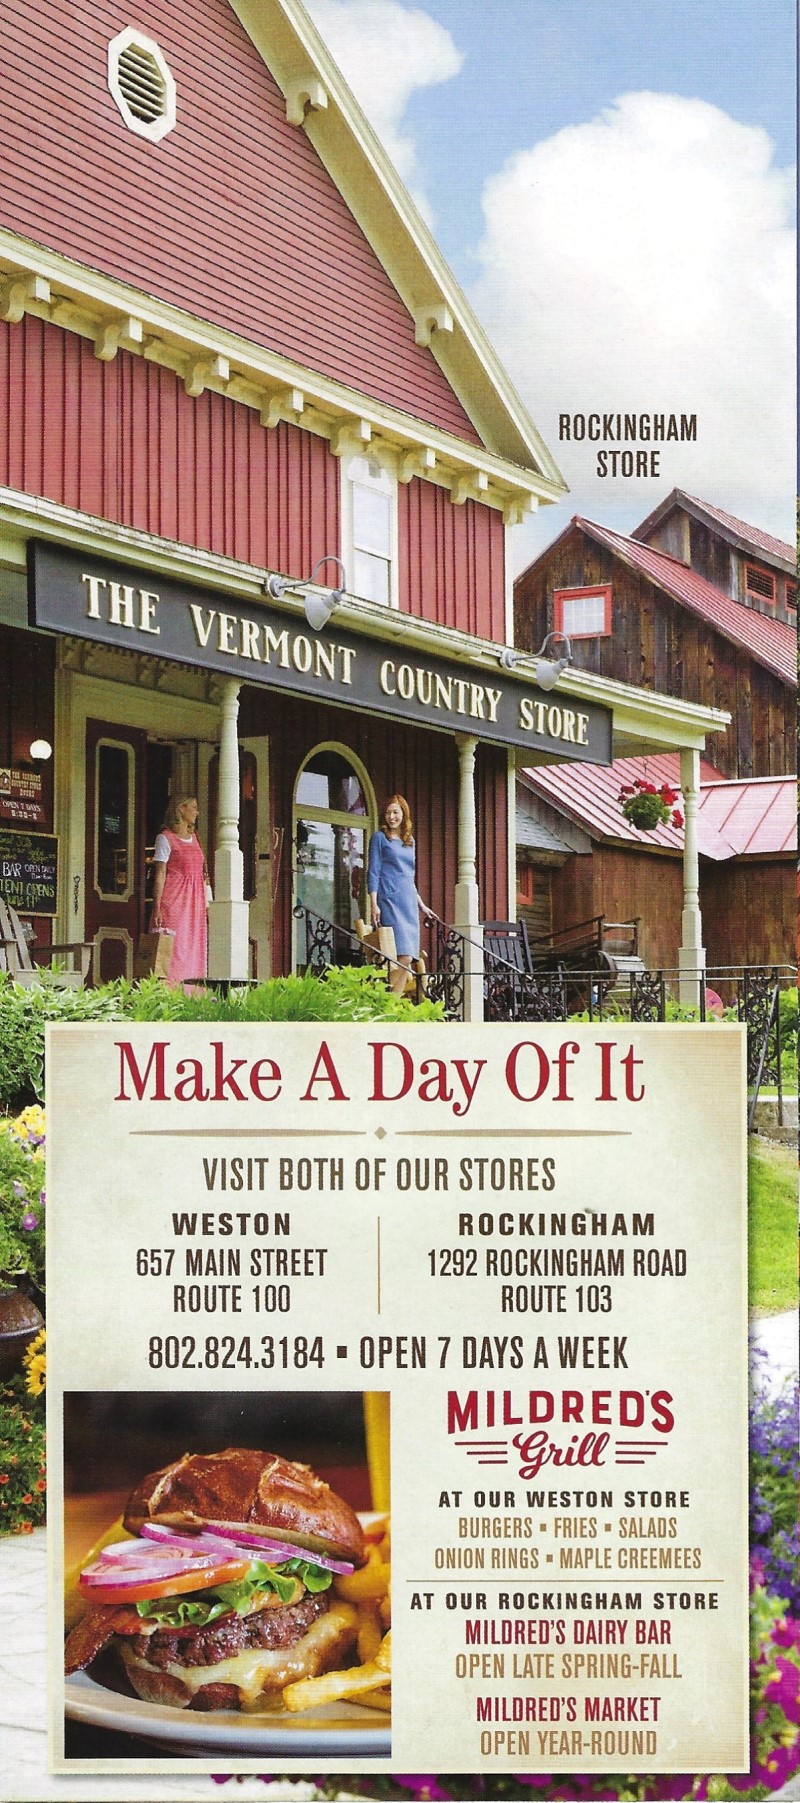 The Vermont Country Store brochure thumbnail